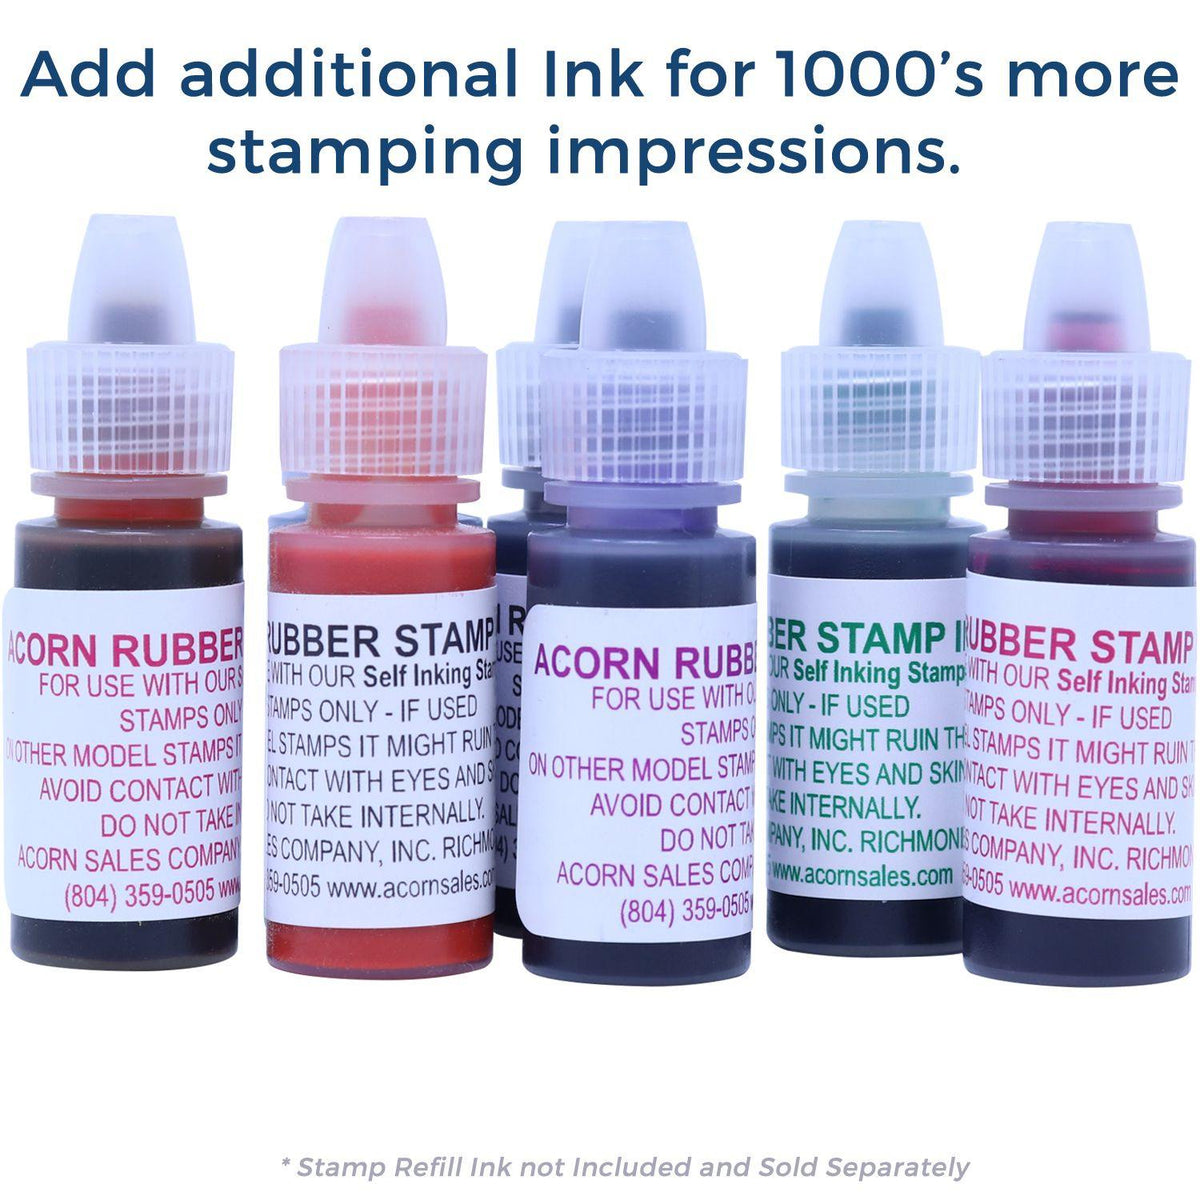 Refill Inks for Large Pre-Inked Patients Signature on File Stamp Available